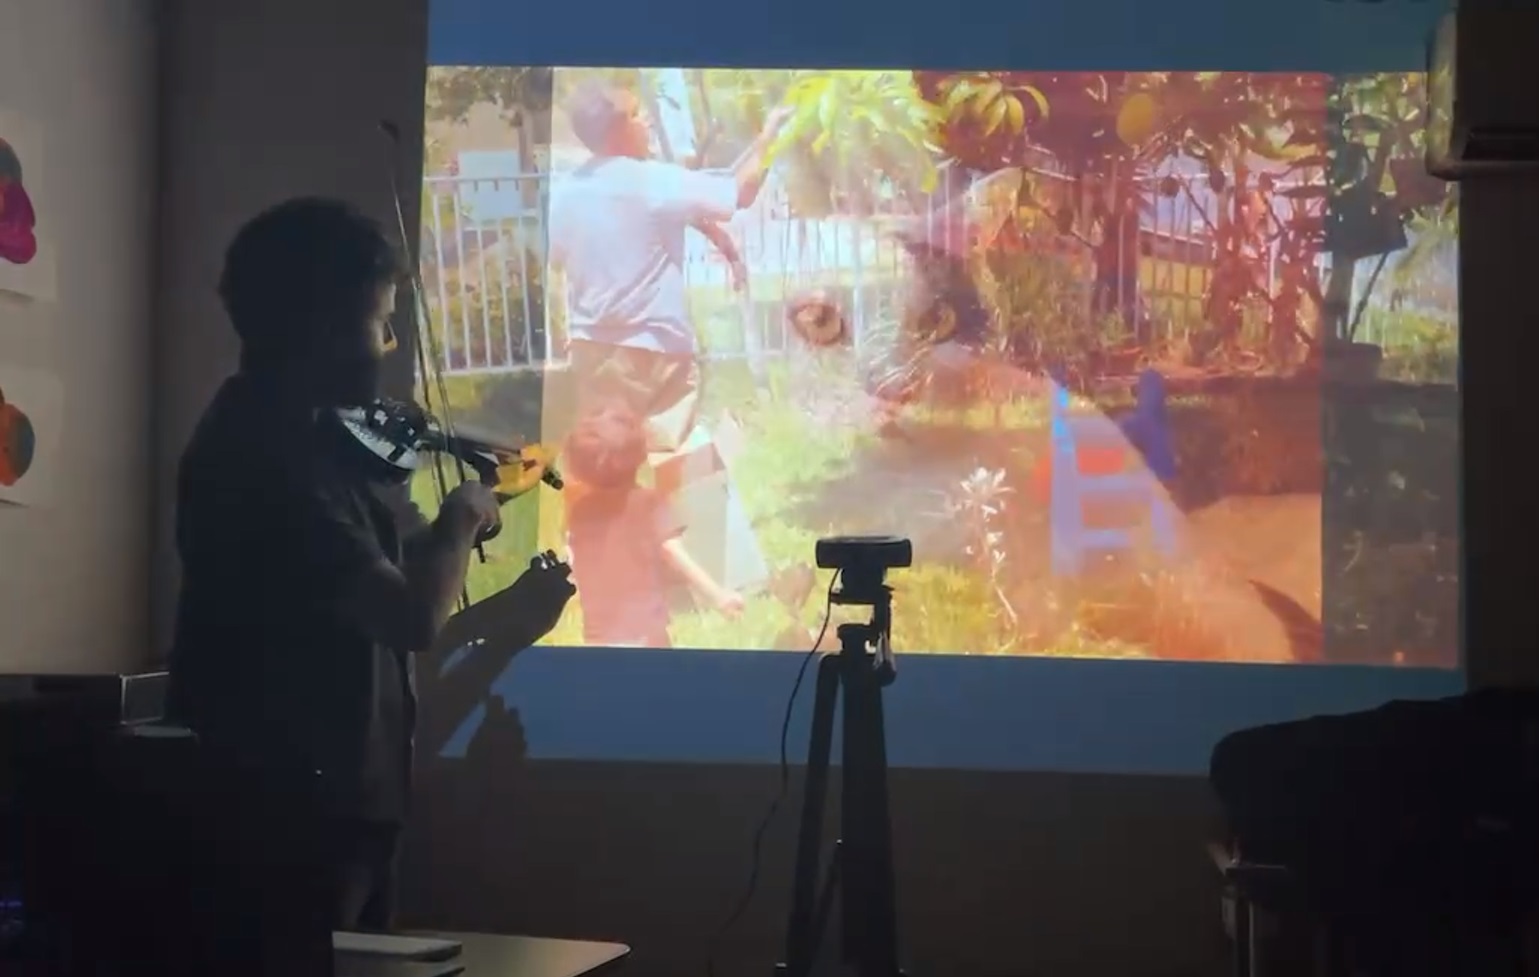 stephan e perez playing a MIDI violin in front of a projection of composited images. The two images are of a man in a garden and a closeup of a cat.